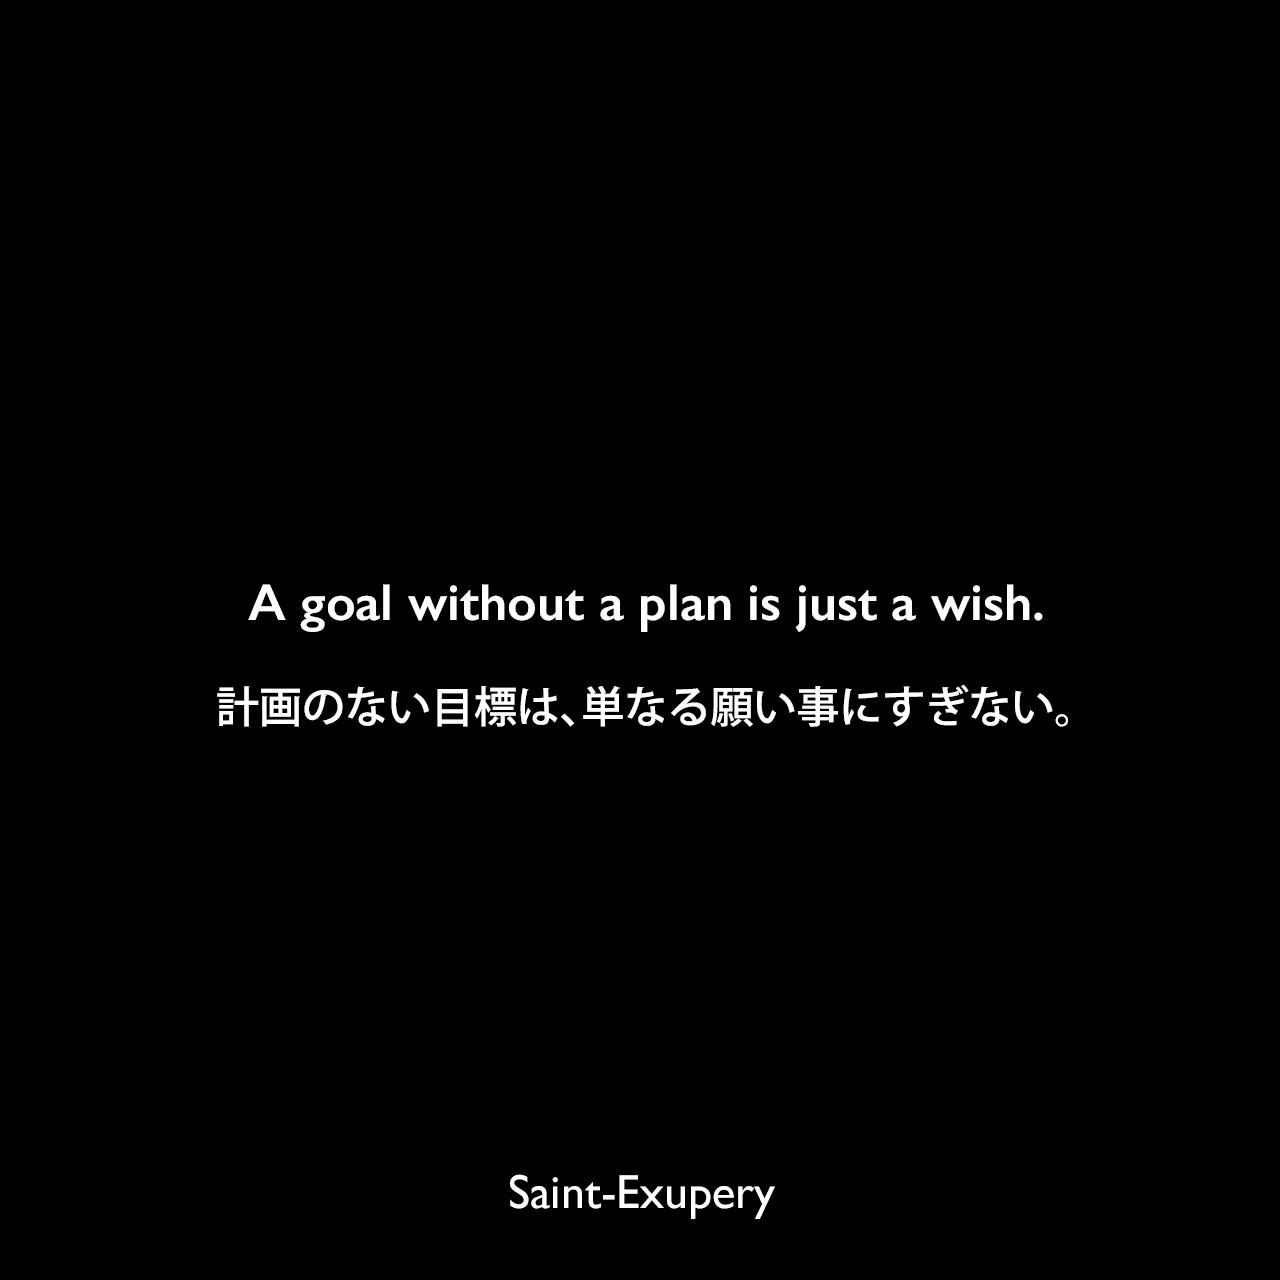 A goal without a plan is just a wish.計画のない目標は、単なる願い事にすぎない。Saint-Exupery